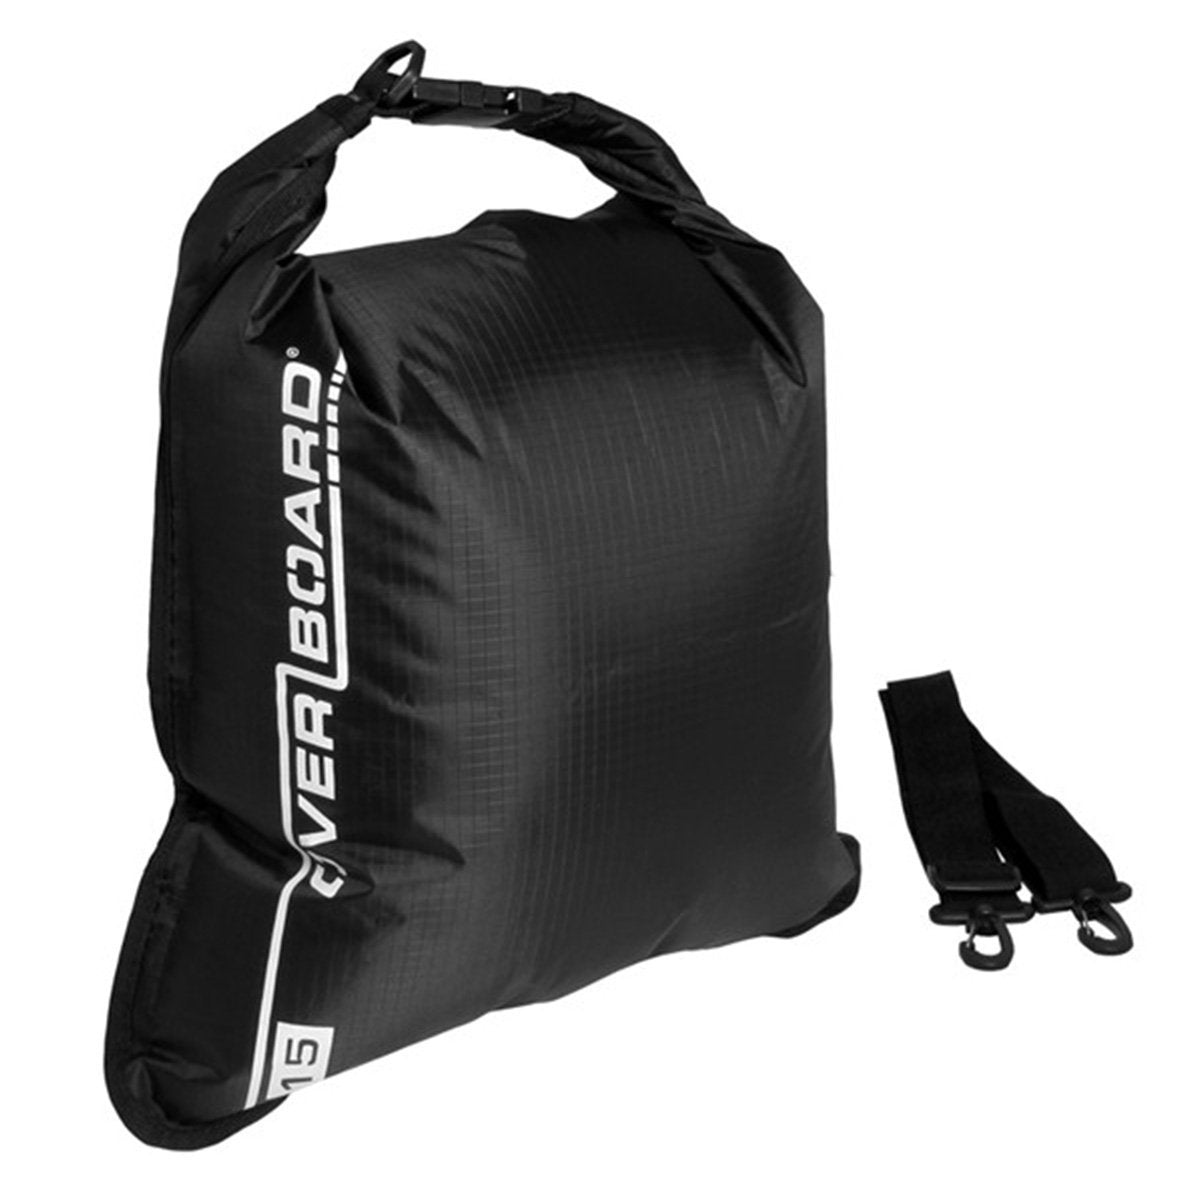 Overboard 15 Litre Dry Flat Bag Bags, Packs and Cases Overboard Black Tactical Gear Supplier Tactical Distributors Australia